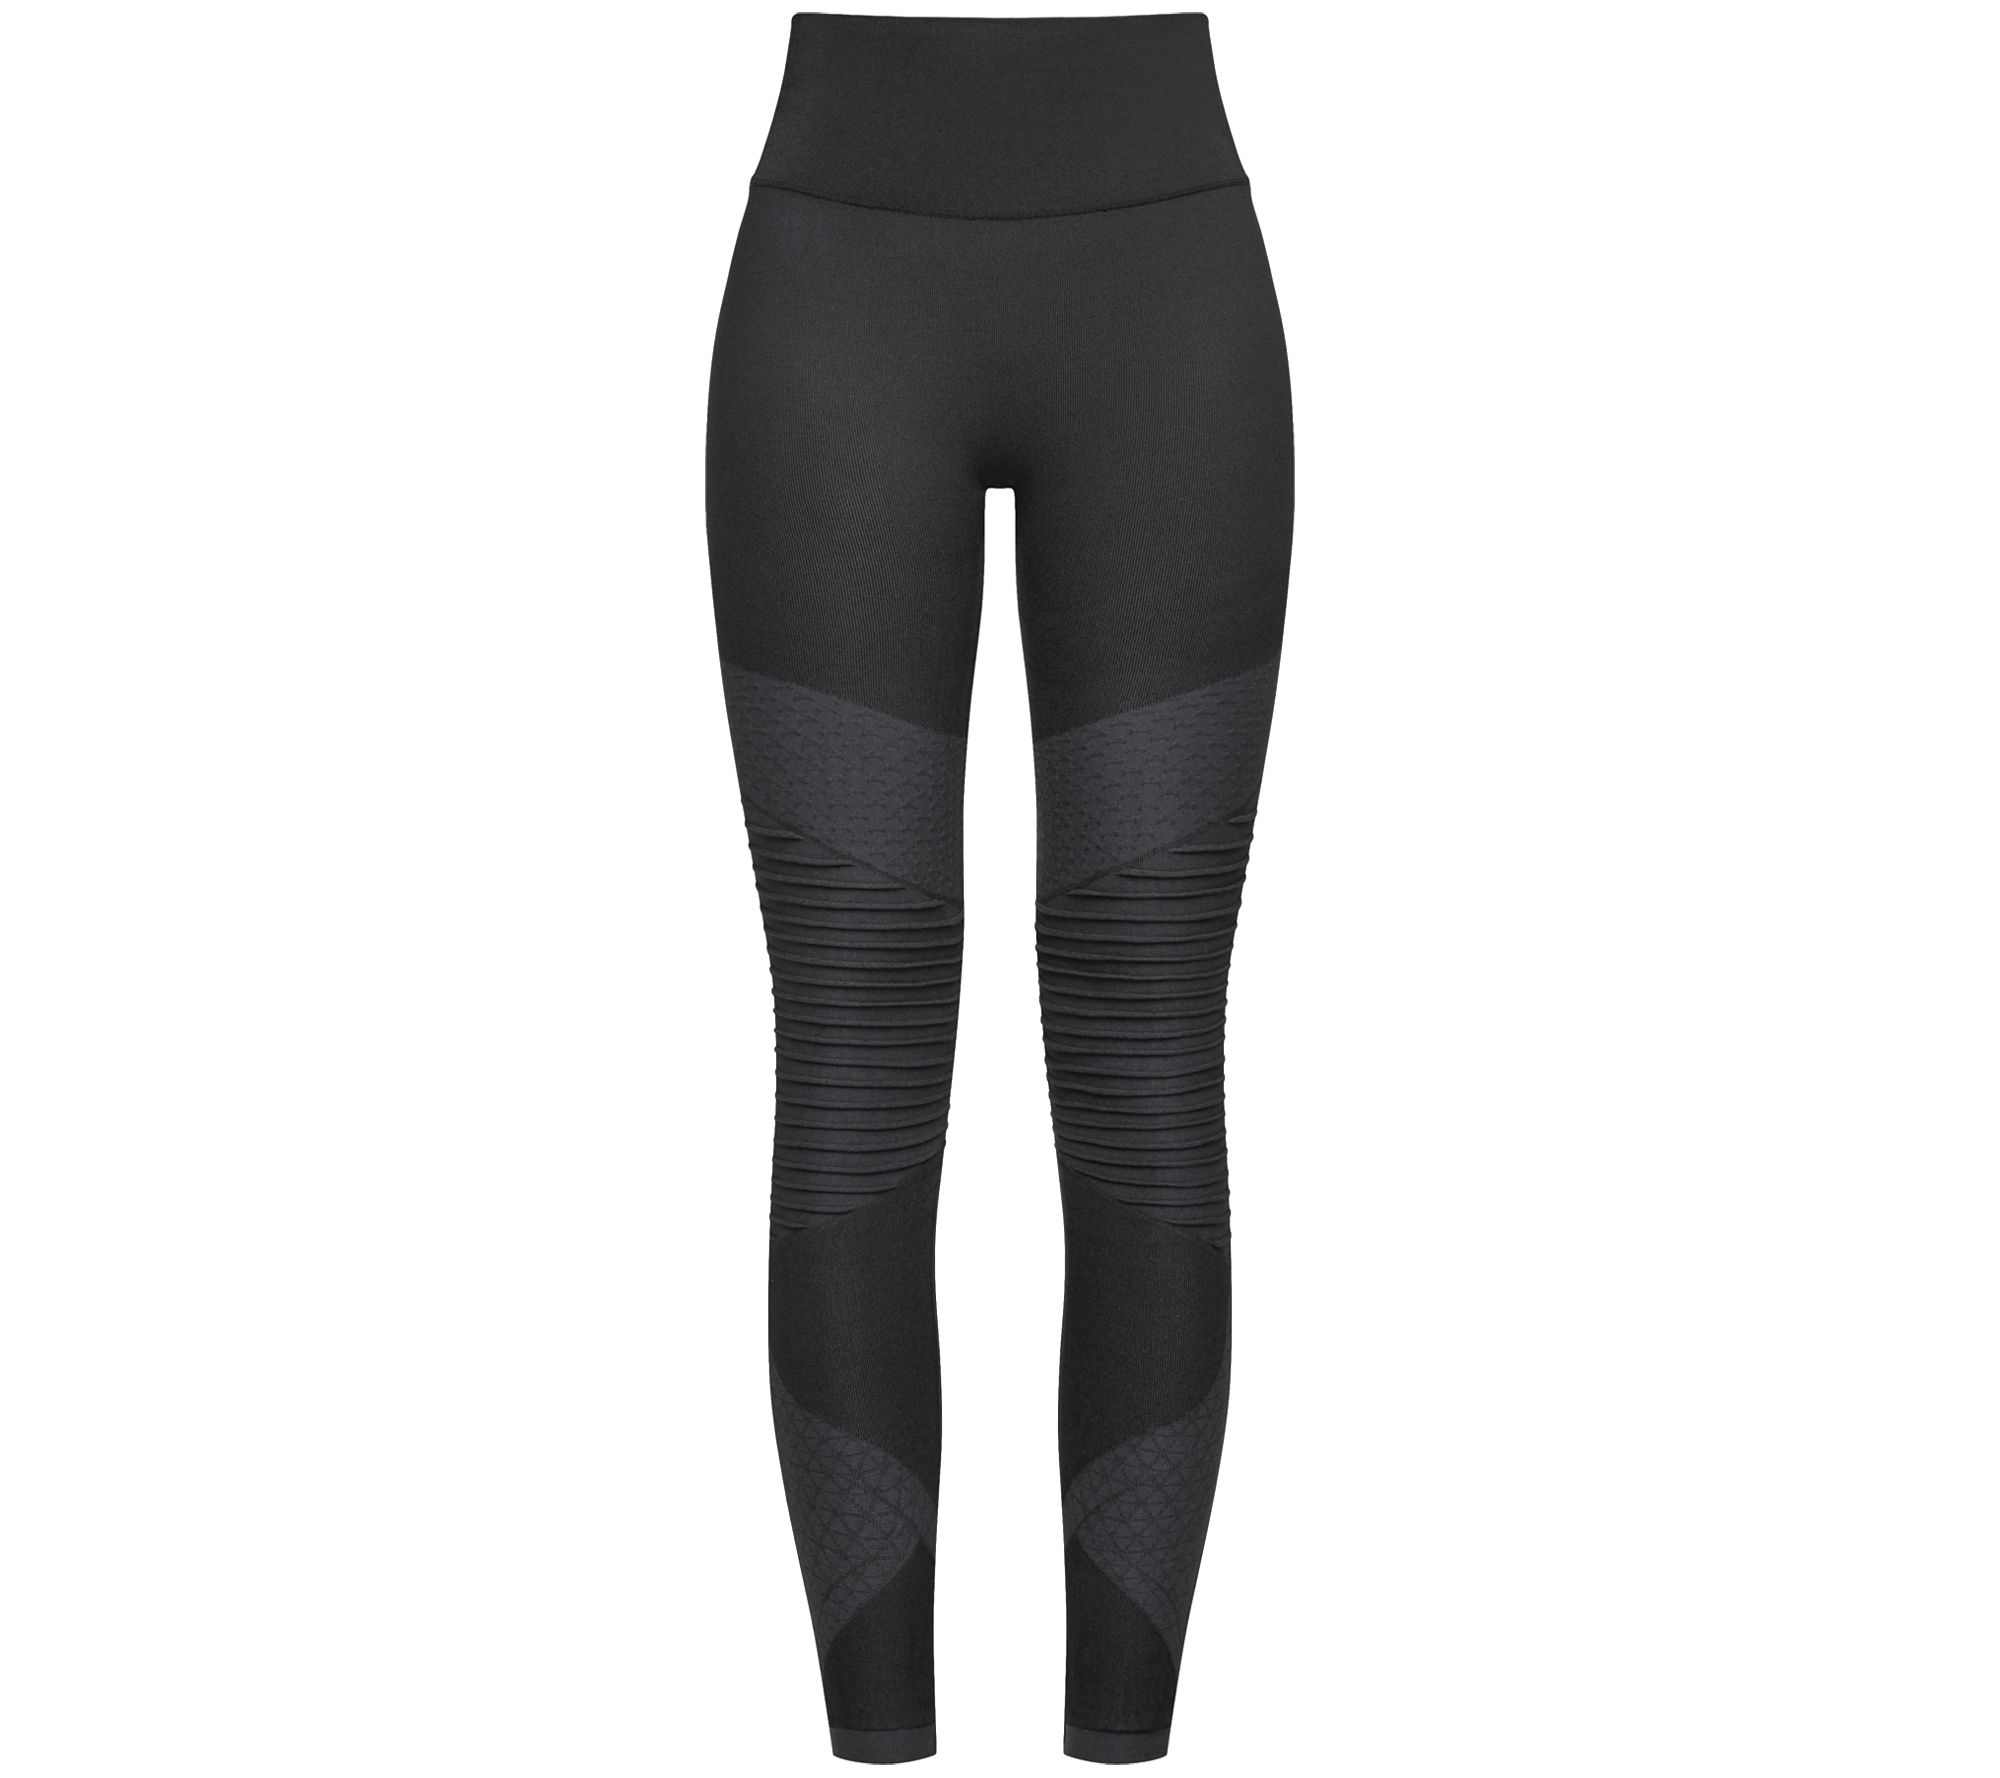 Spanx Look At Me Now Seamless Moto Leggings Women's. Small - $21